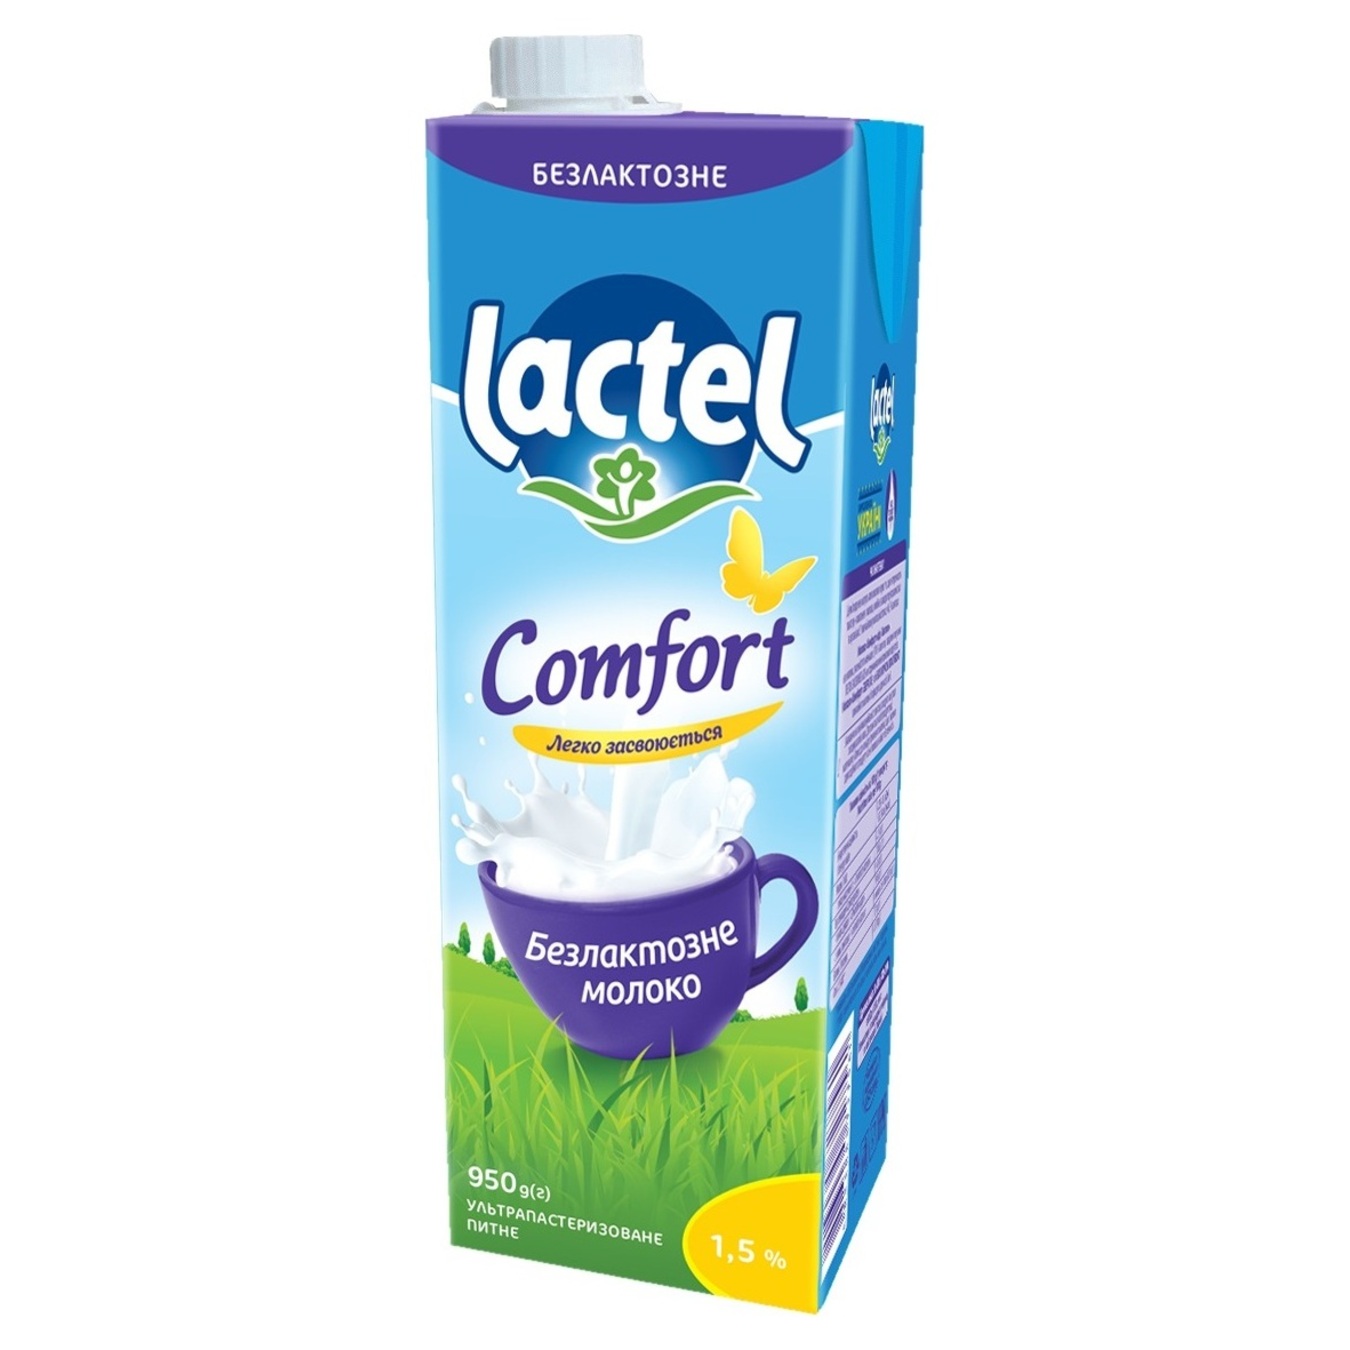 Lactel drinking lactose-free ultra-pasteurized milk 1.5% 950g